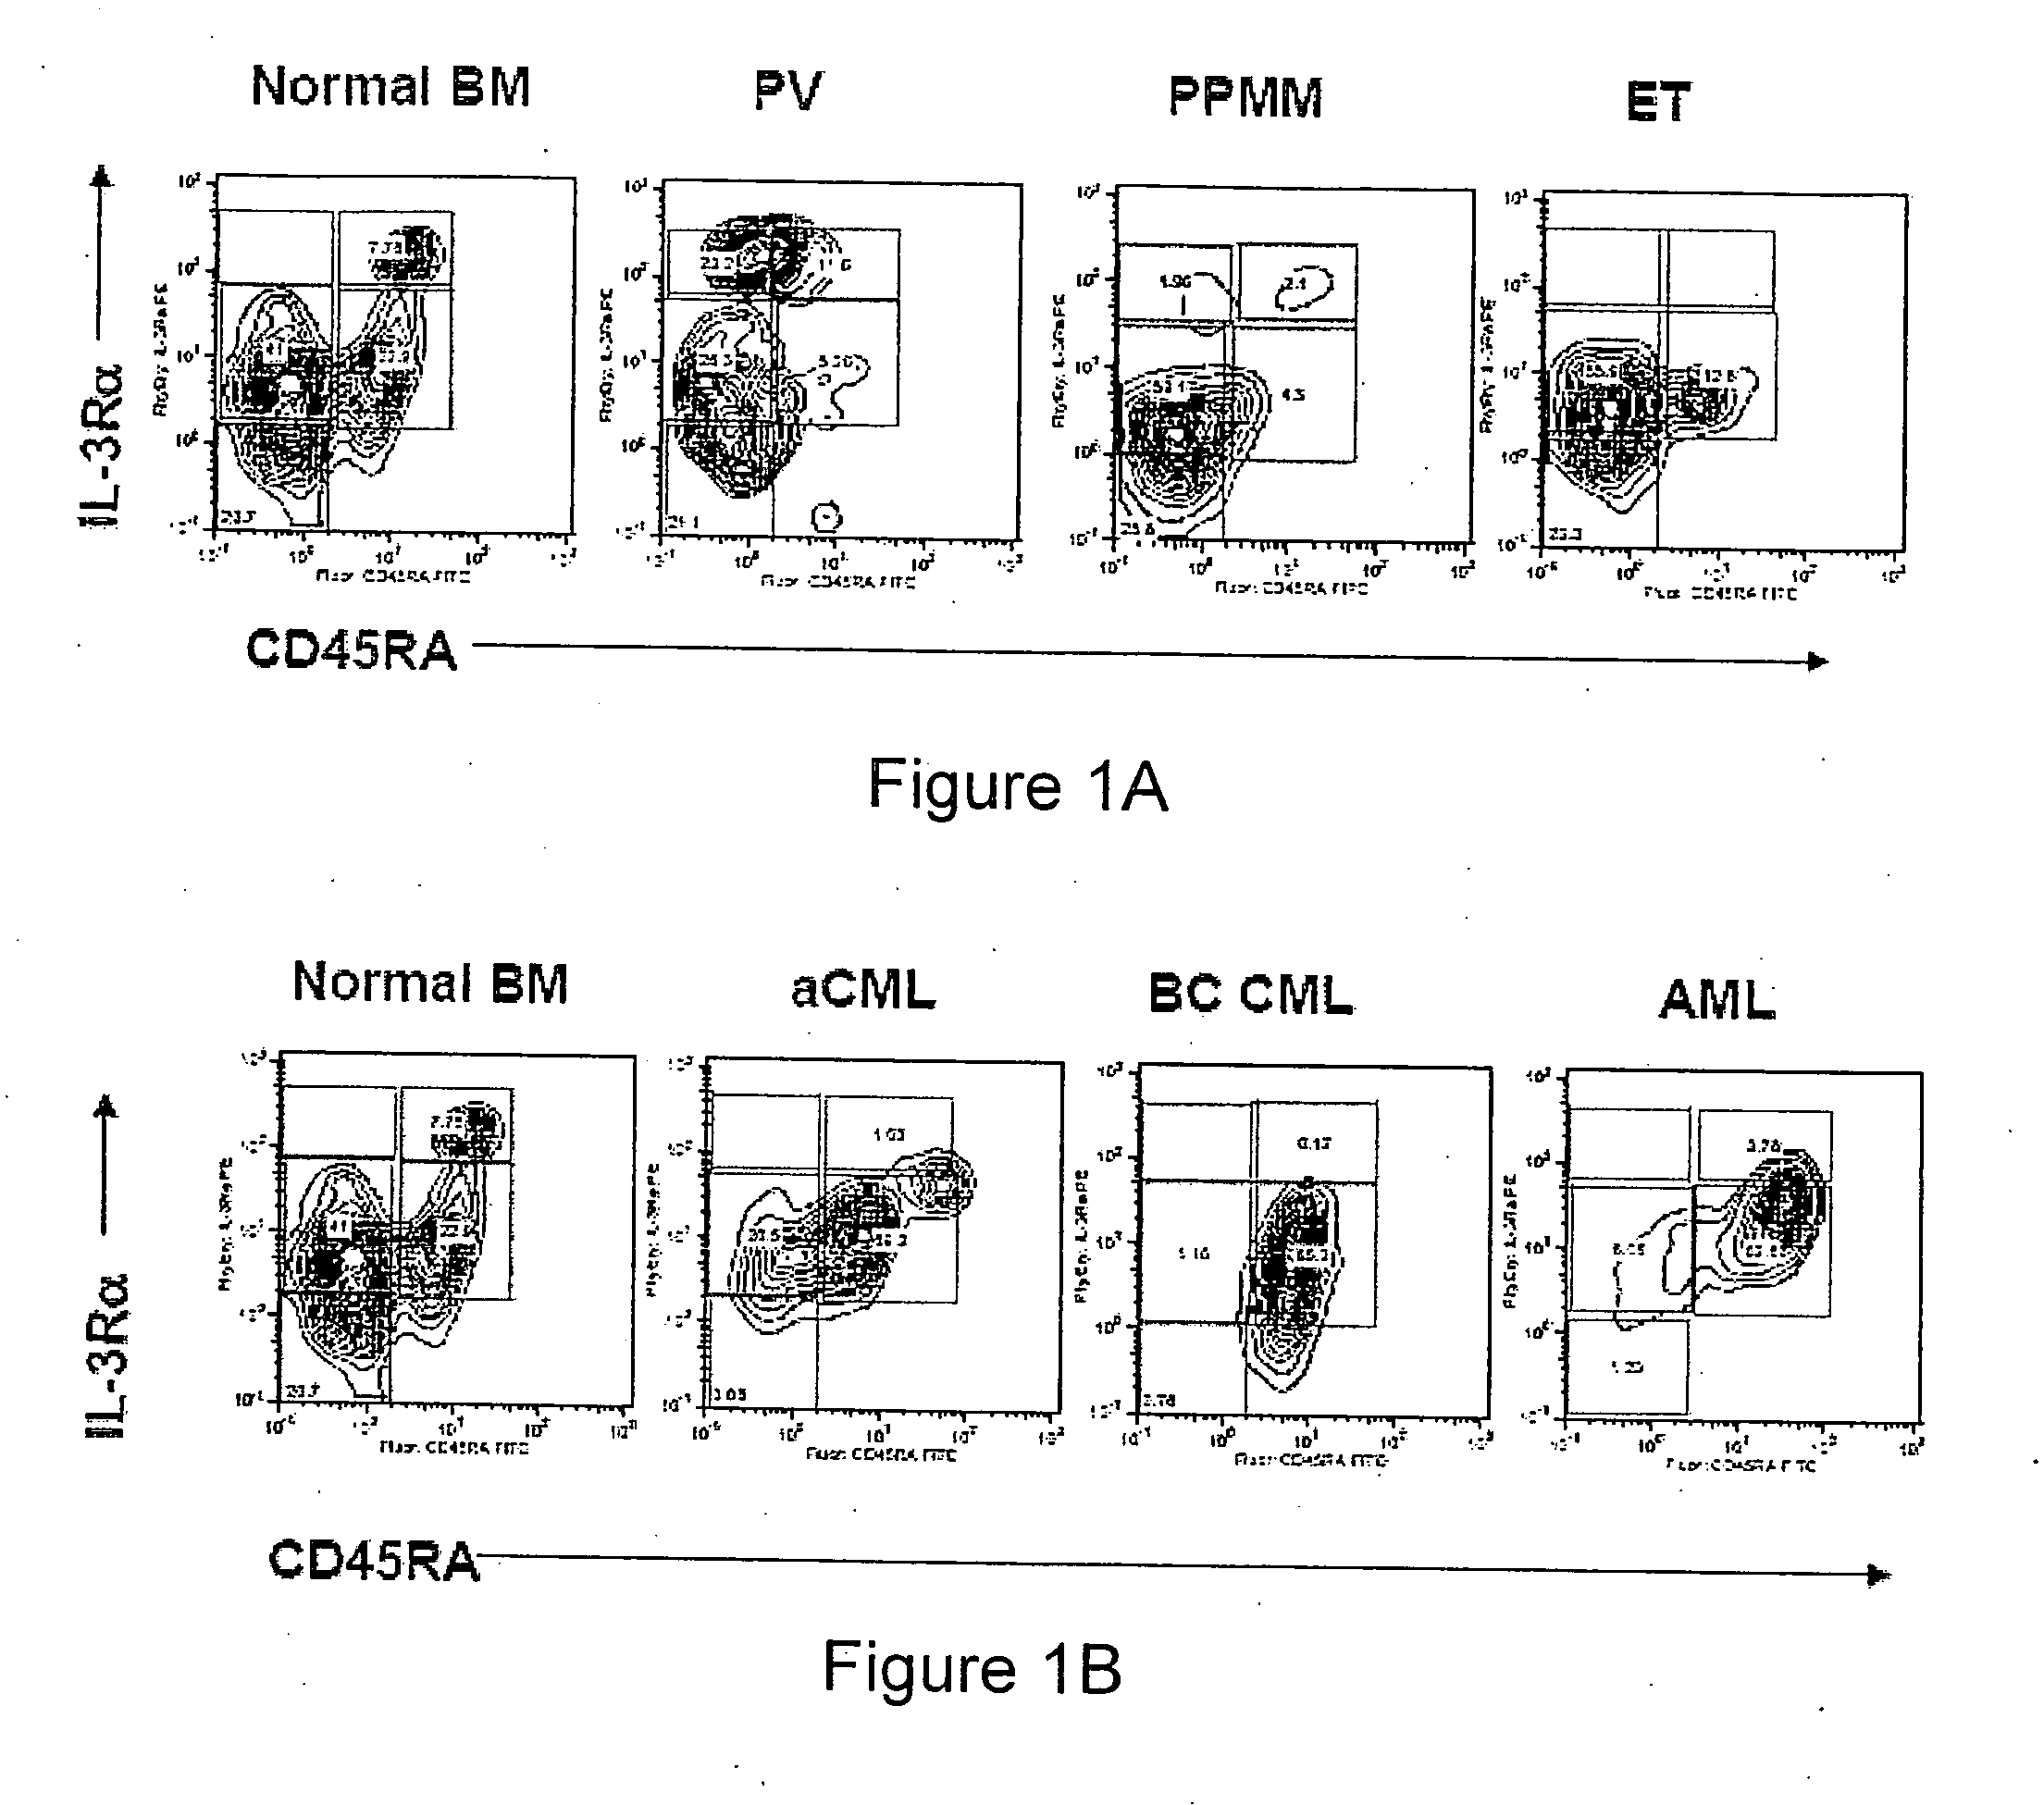 Methods for diagnosing and evaluating treatment of blood disorders